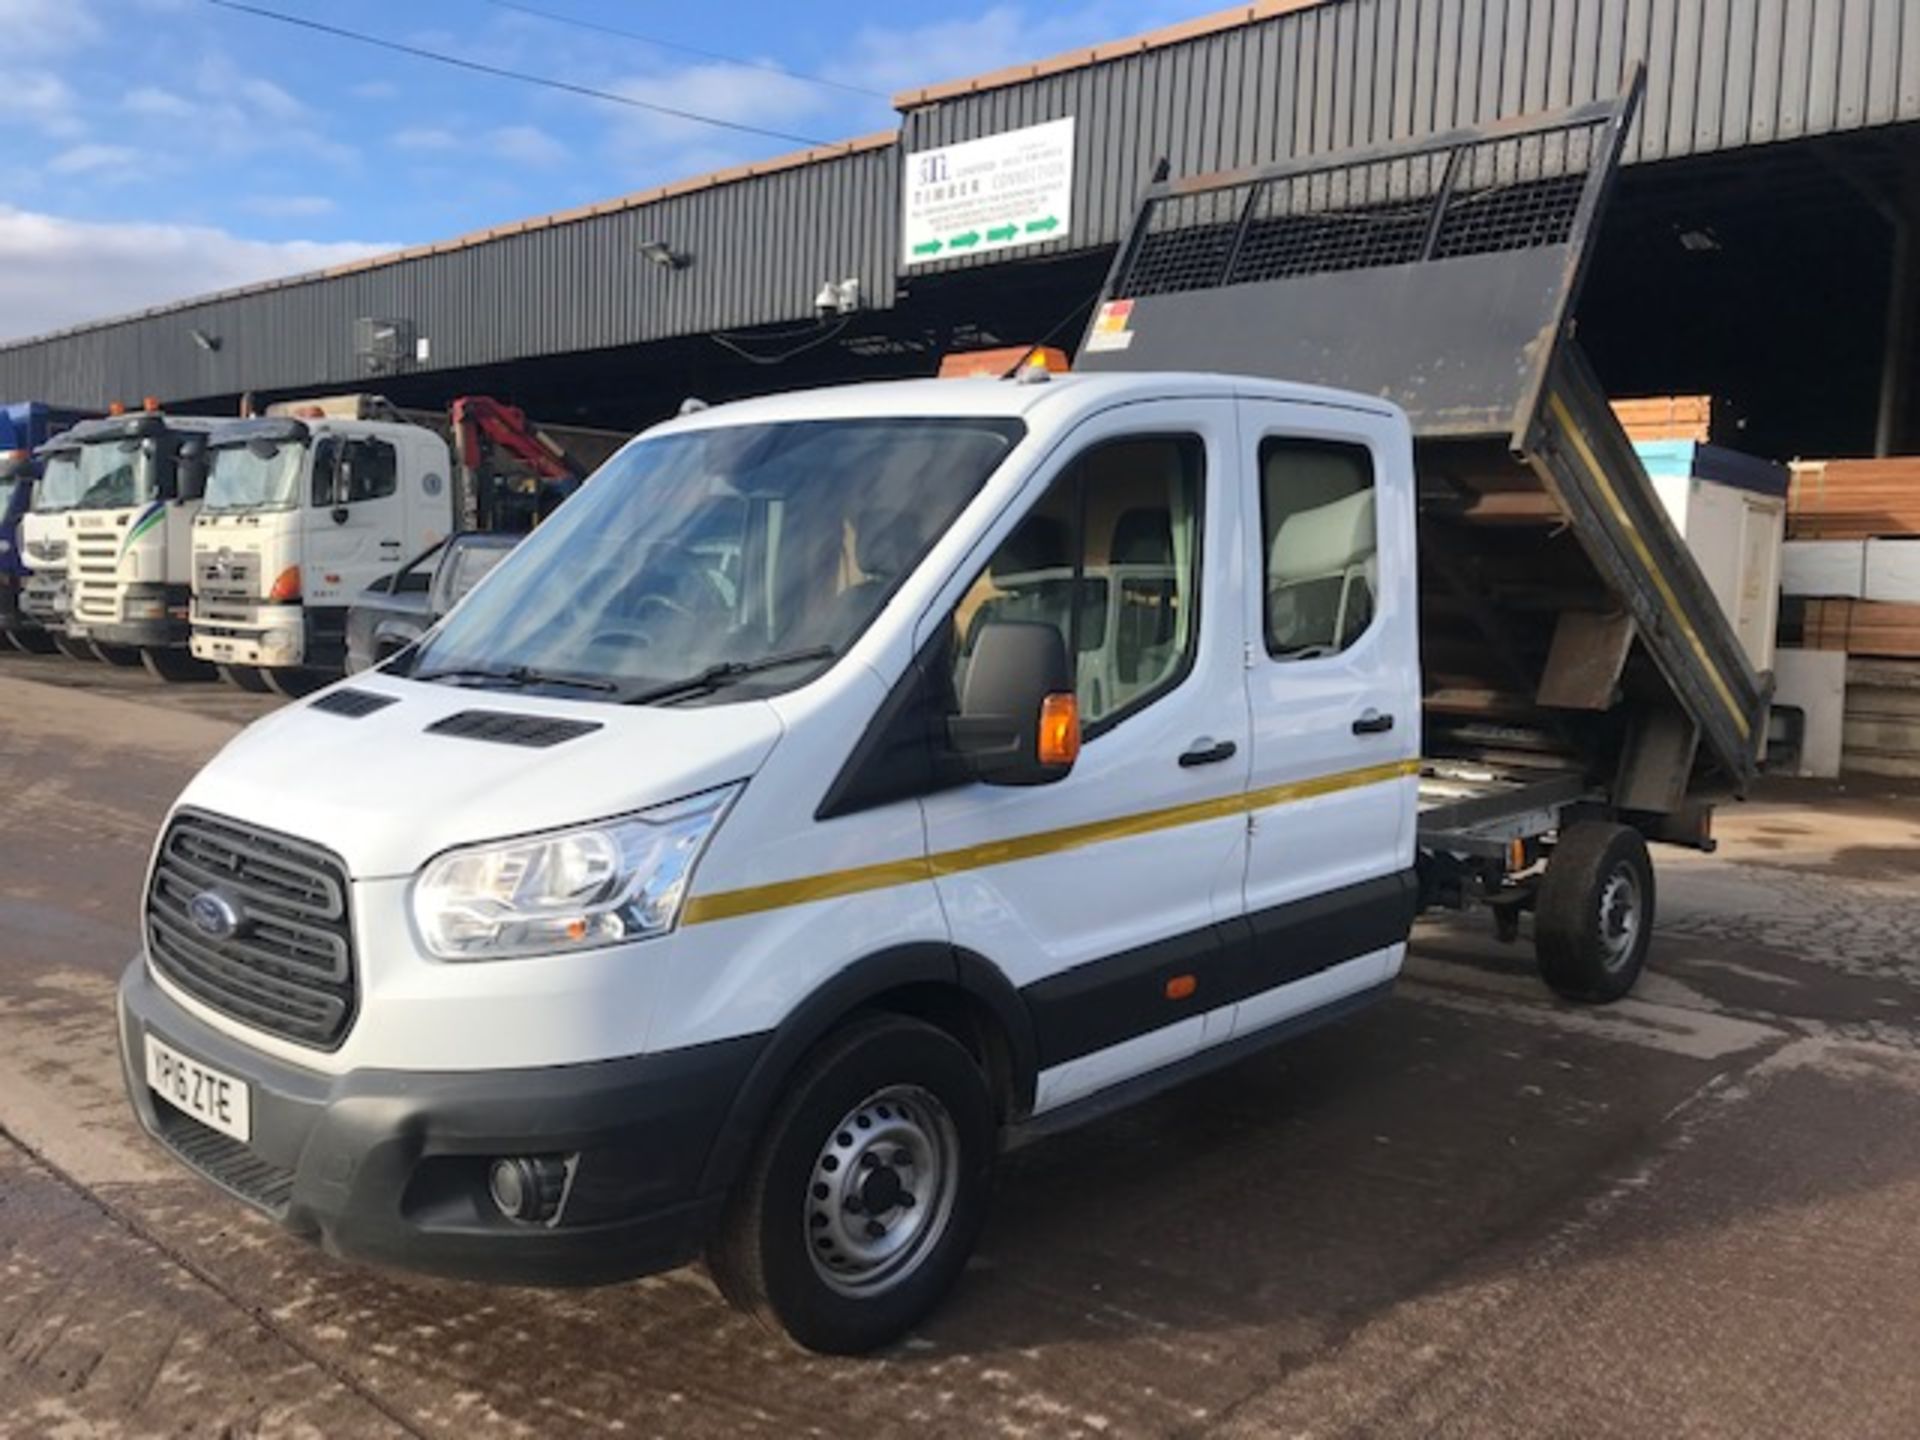 2016 Ford Transit 350 Double cab Tipper - Image 2 of 11